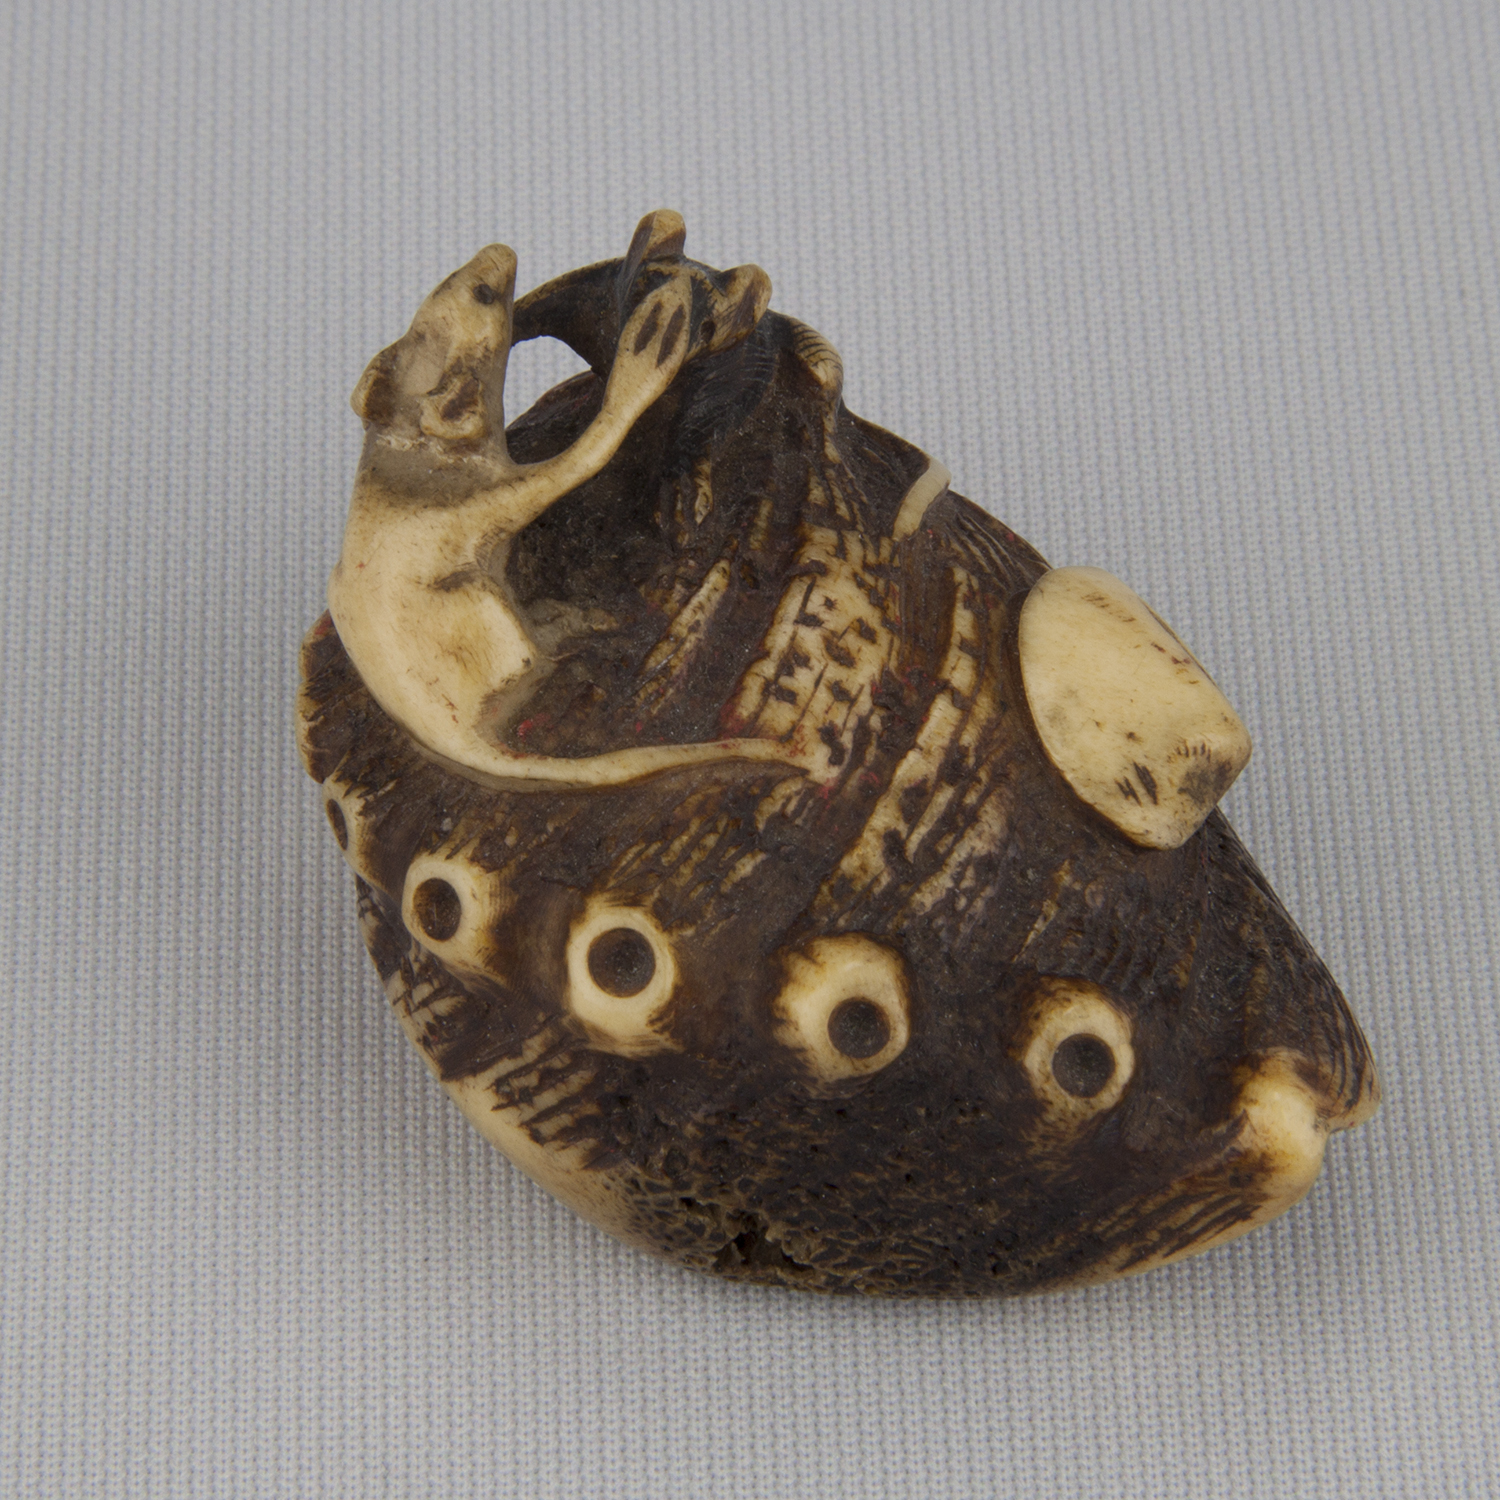 Netsuke depicting two rats fighting on an abalone shell, ca. 18th–19th century, Ivory, The Herman D. Doochin Collection, 1992.172